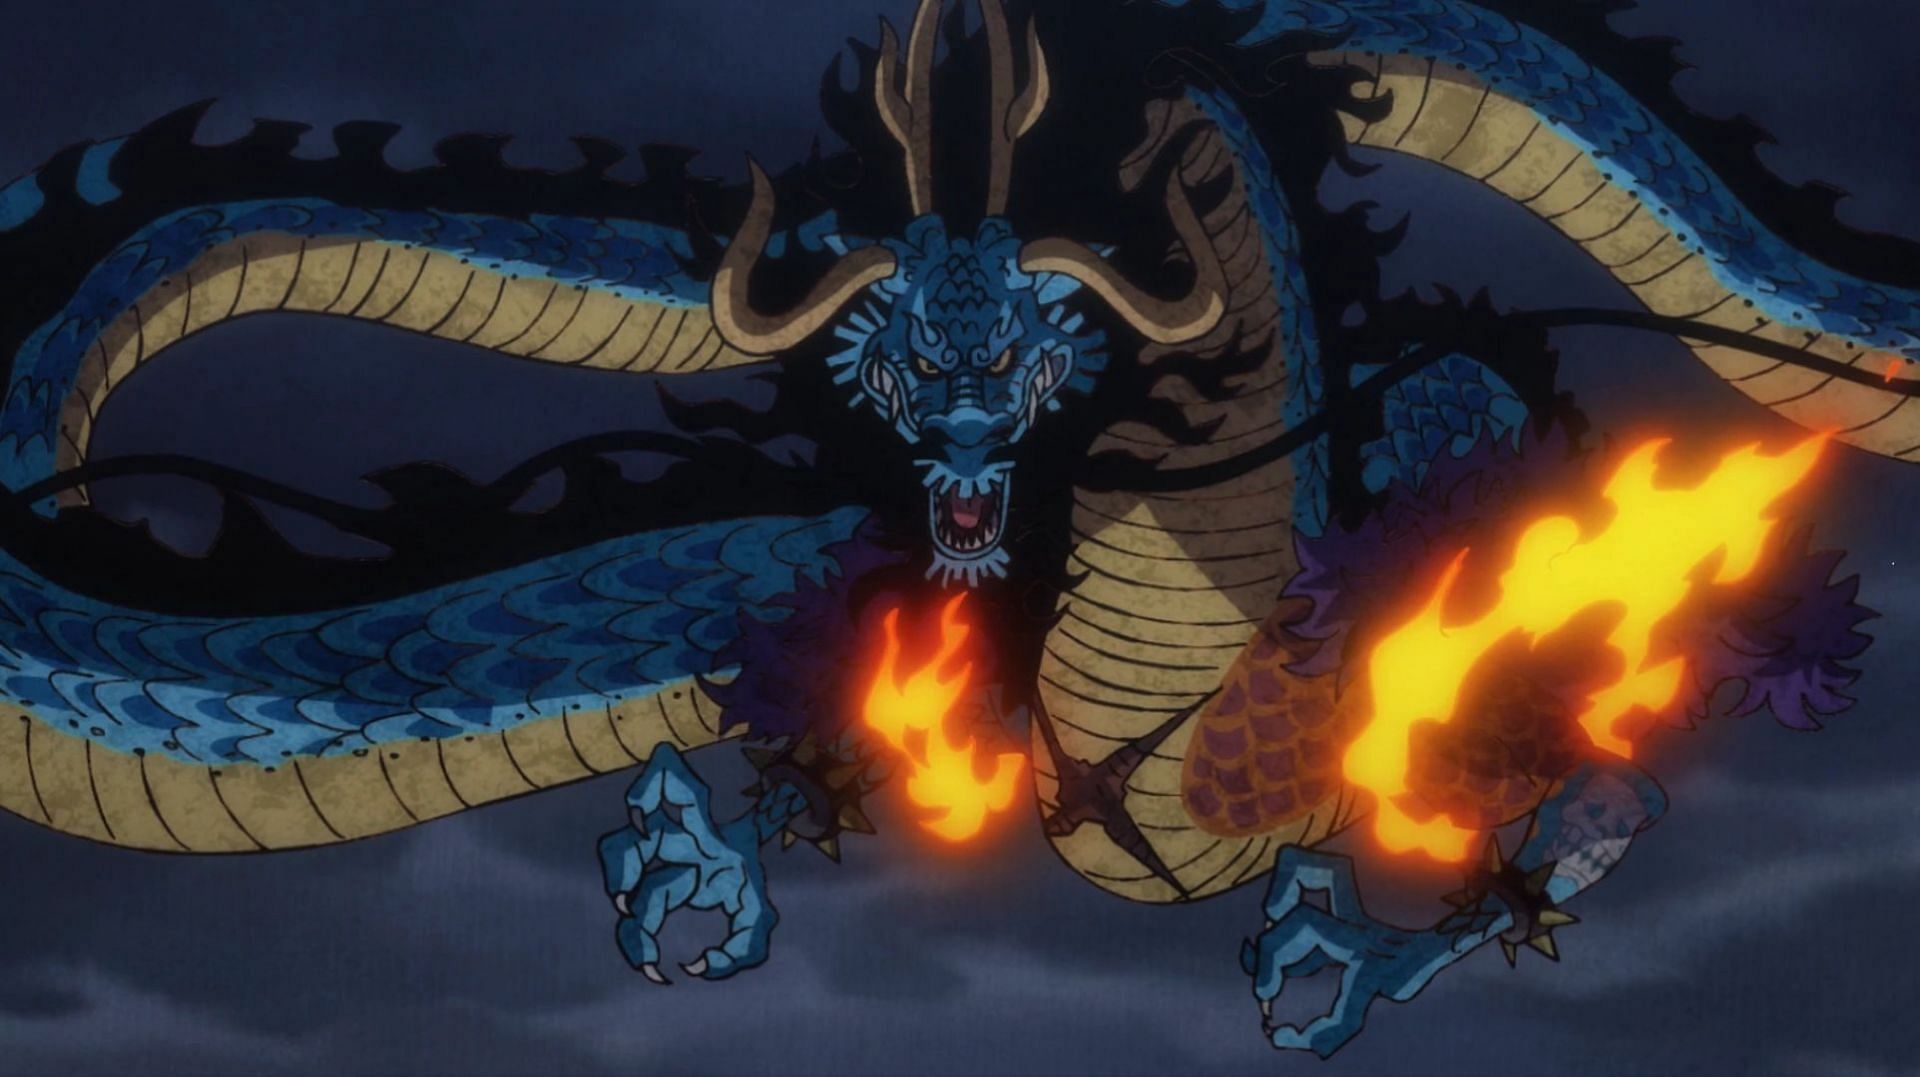 The power granted by the Fish-Fish fruit, Model: Azure Dragon is truly spectacular. (Image via Toei Animation)